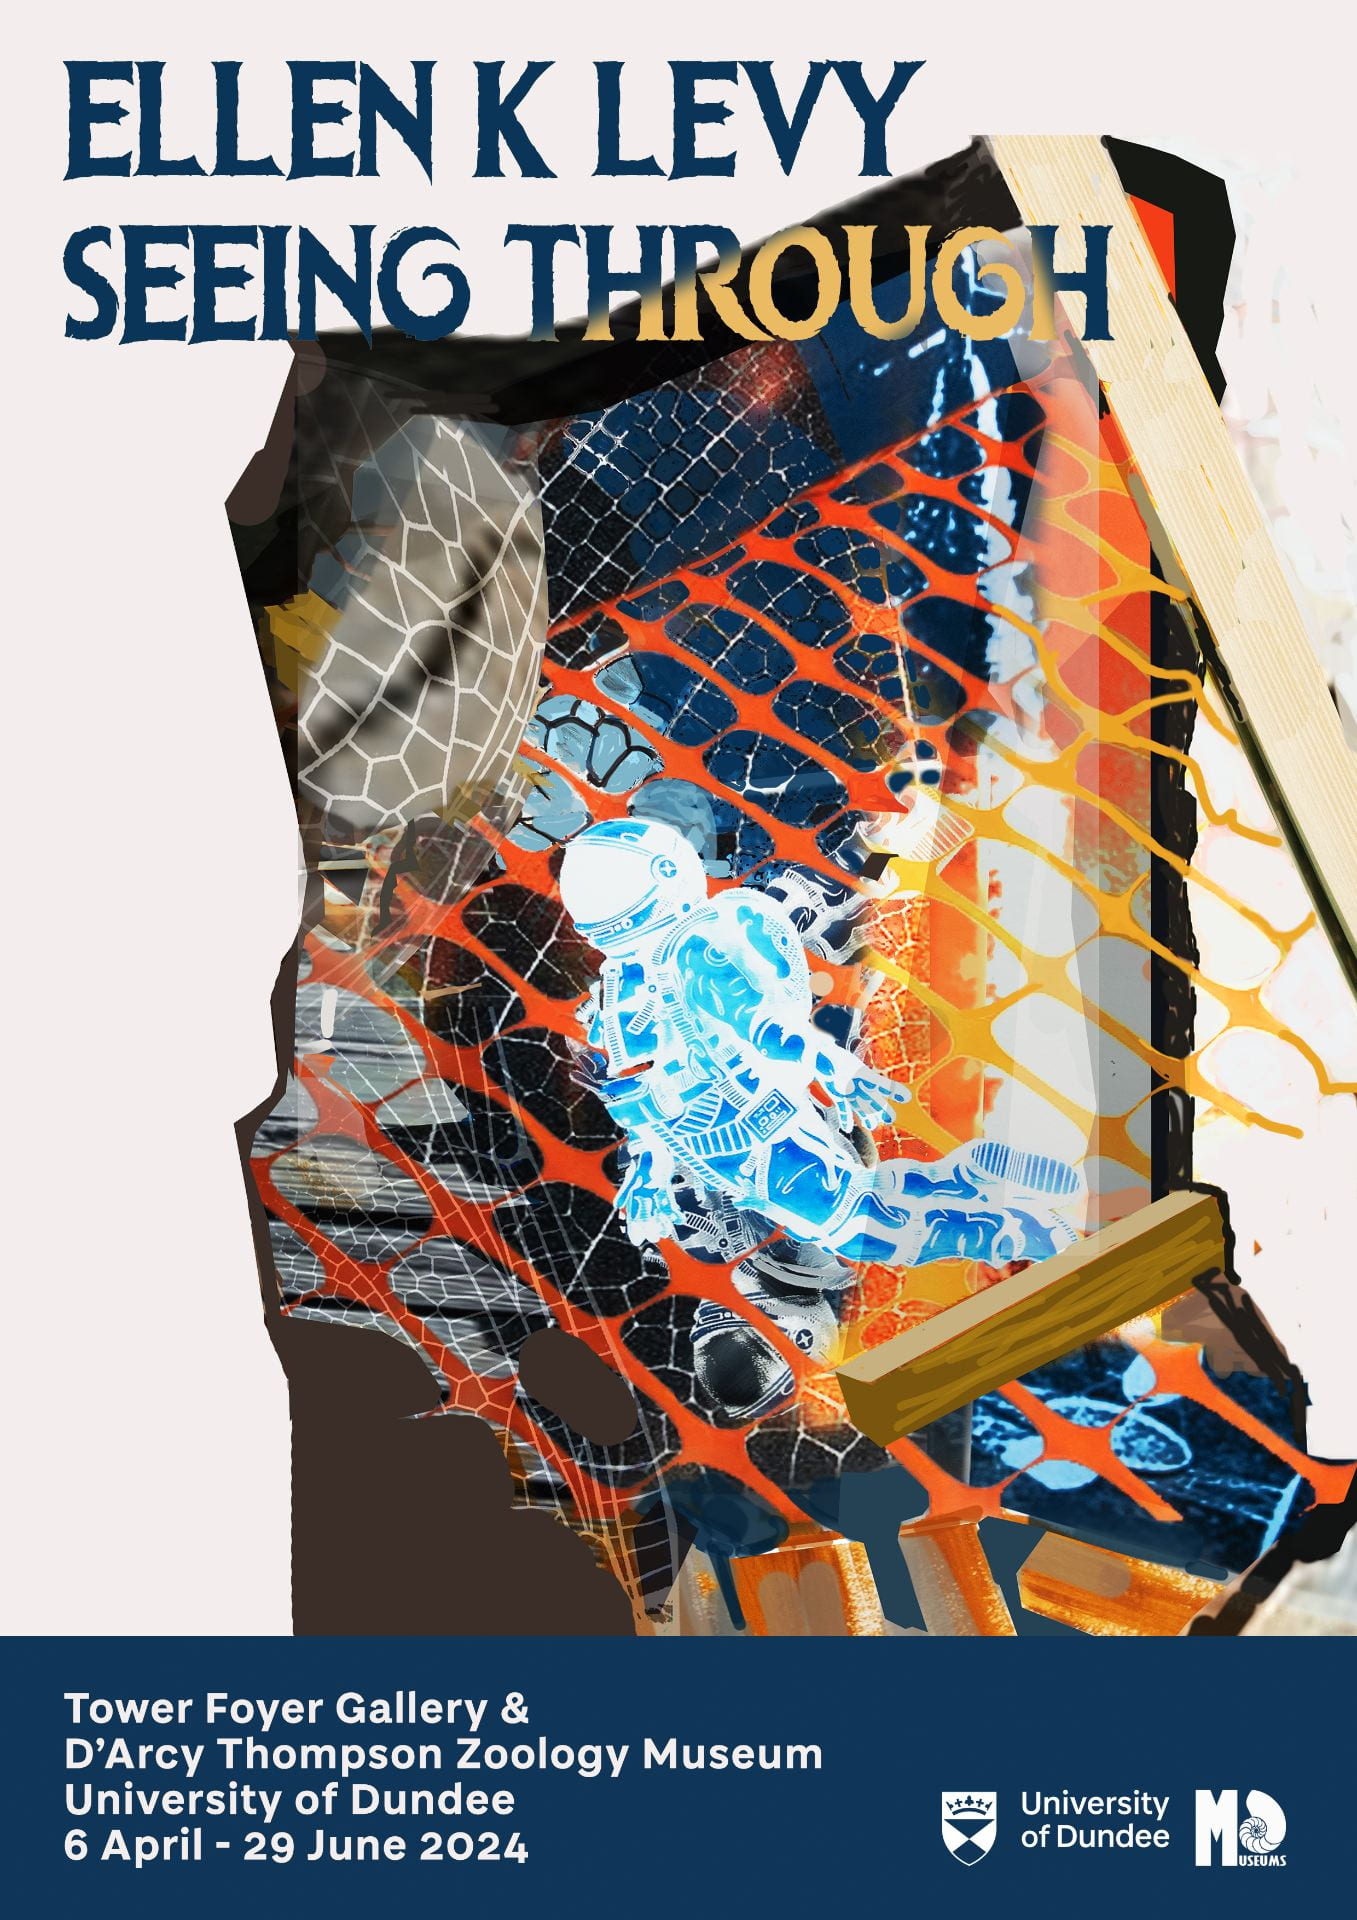 Poster image for the exhibition Seeing Through